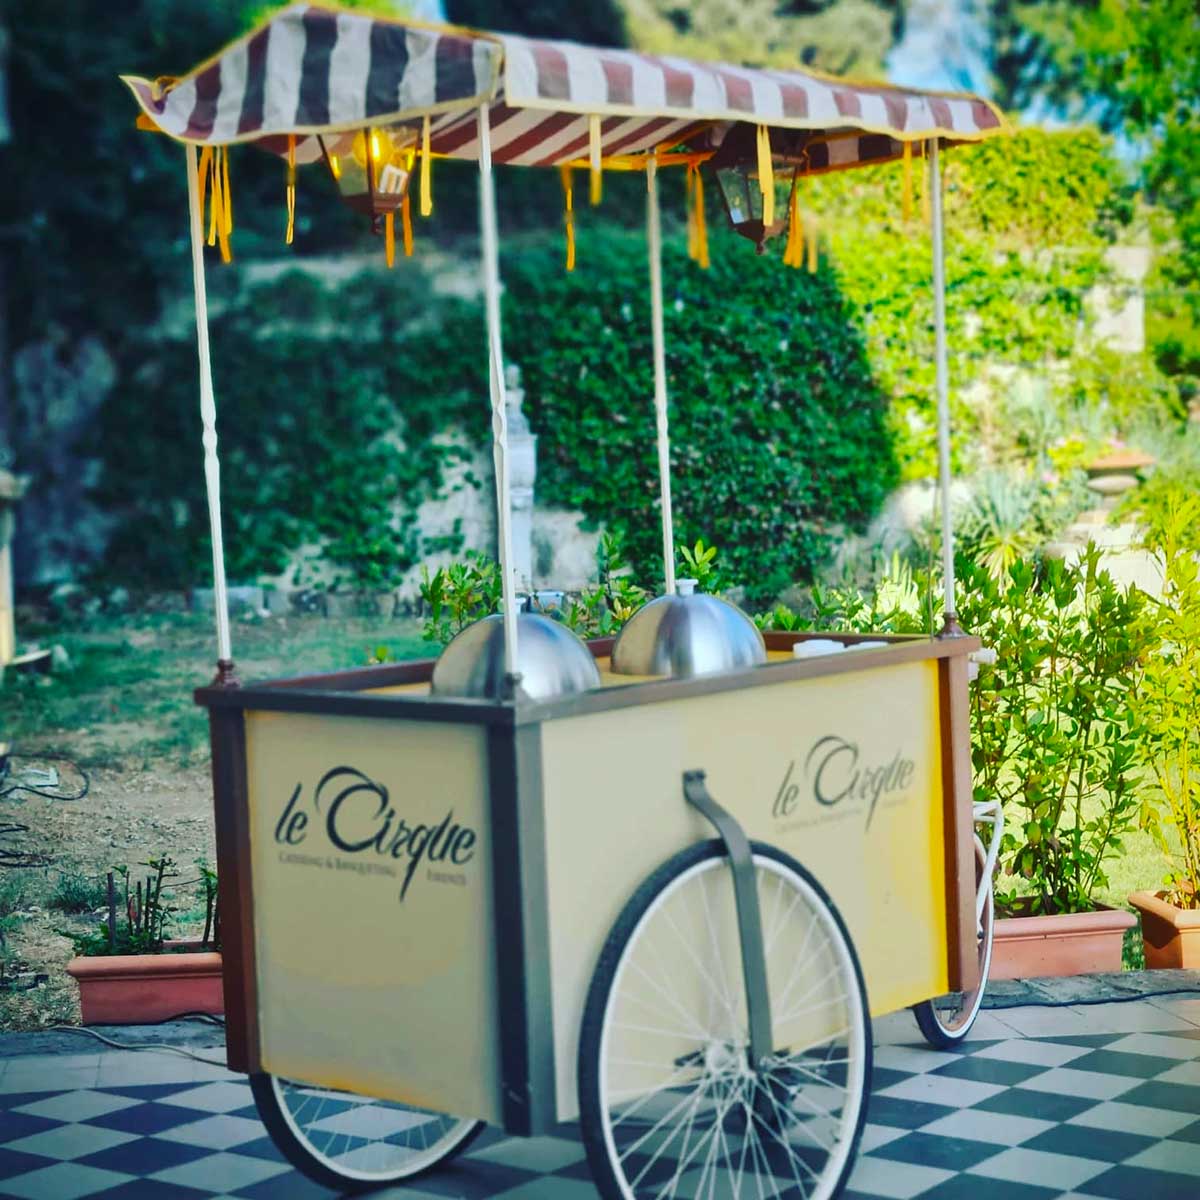 Le Cirque Catering Firenze